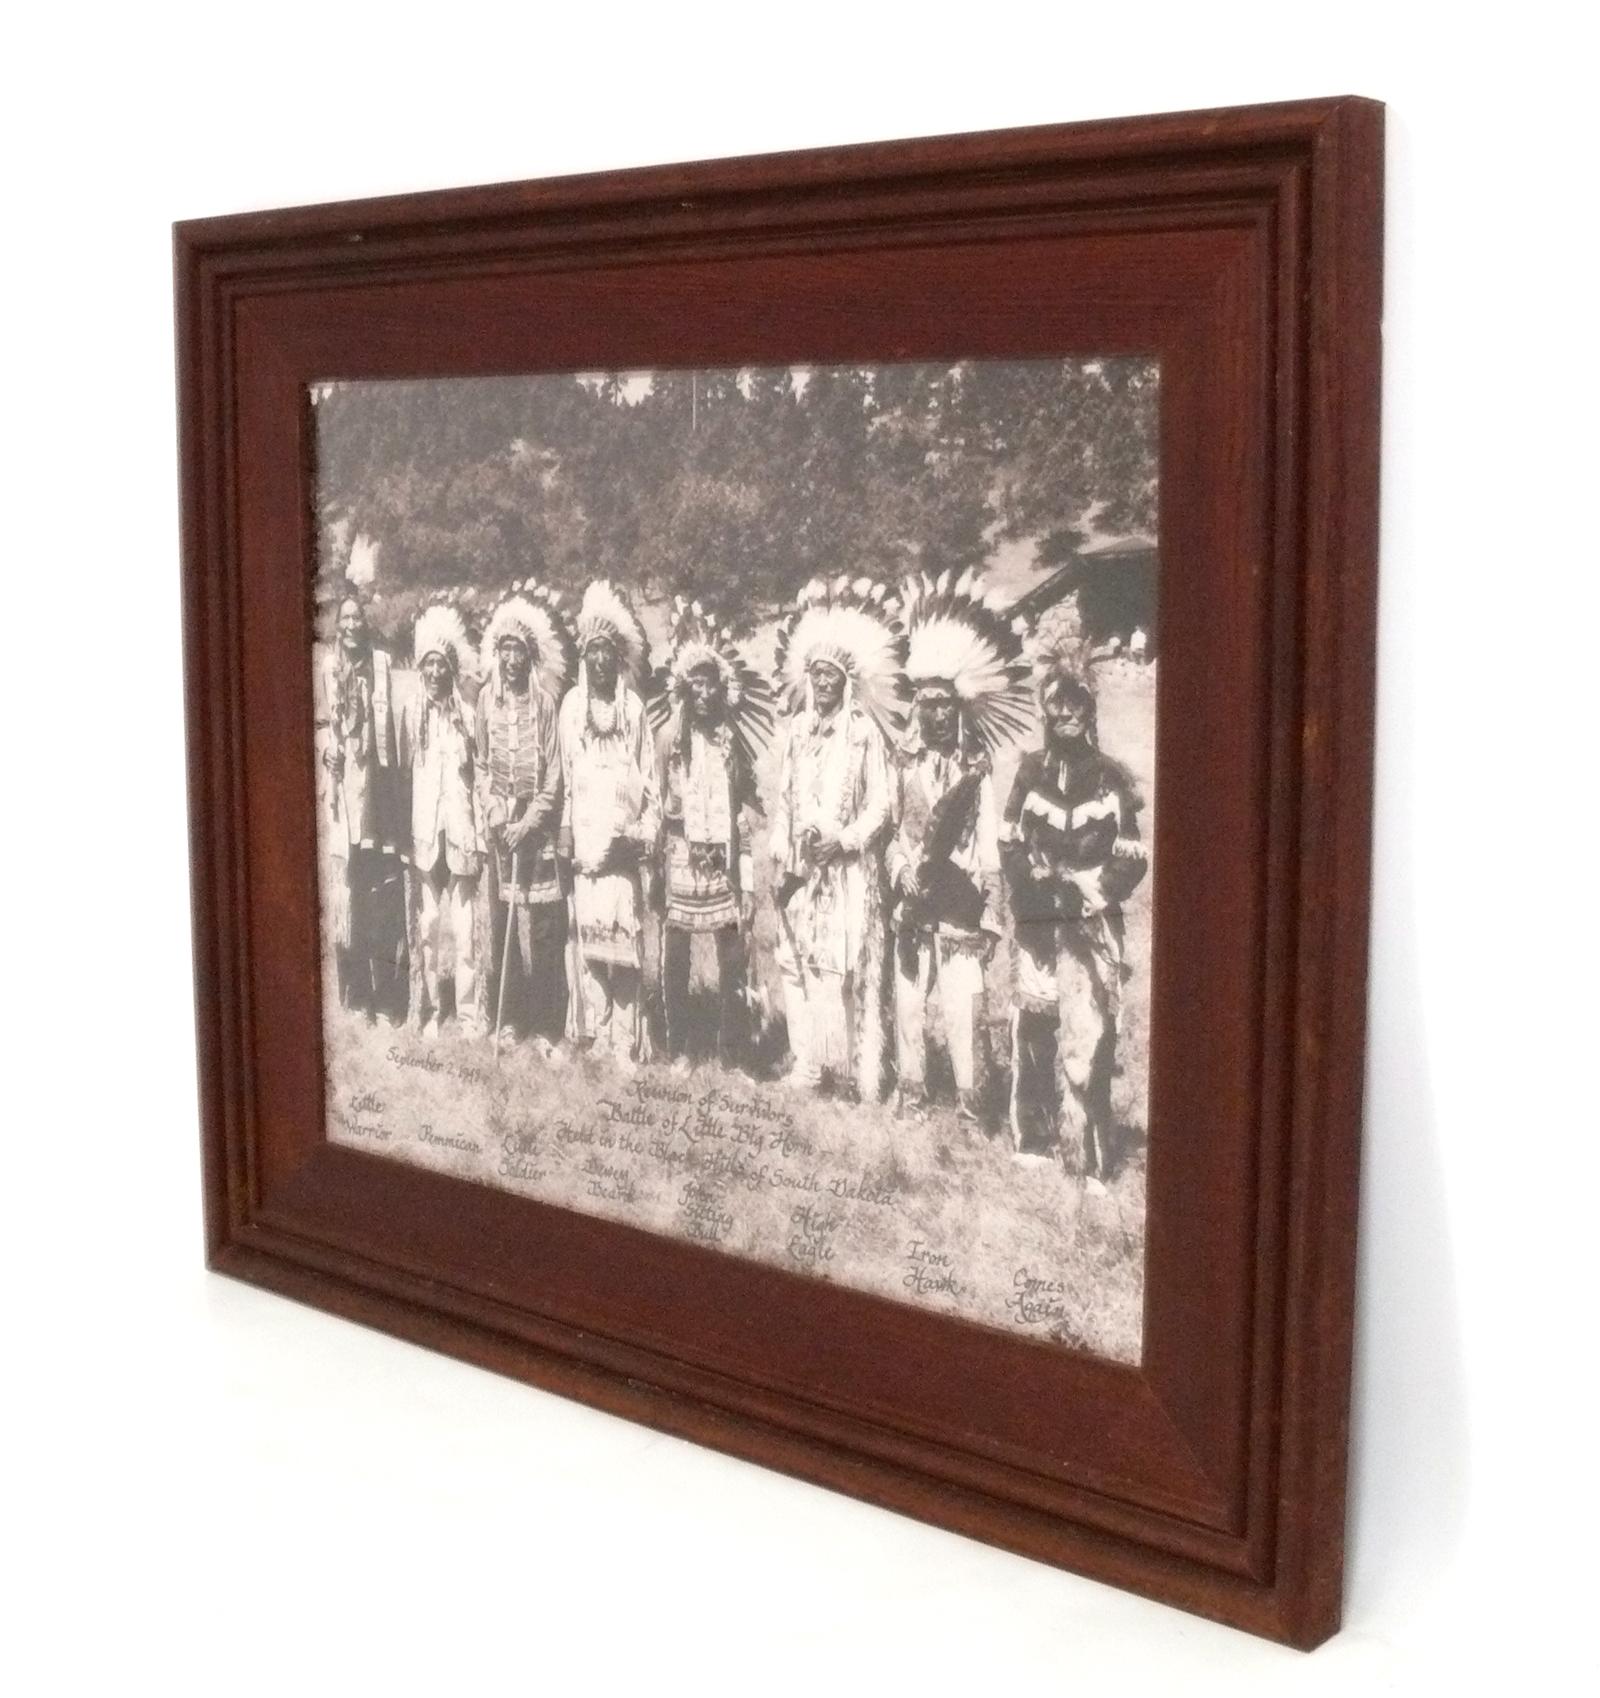 Gelatin silver photograph of “The Battle of the Little Bighorn Survivors”, by Bill Groethe, American, circa 1948. Recently professionally framed in a vintage clean lined Mission oak frame under UV resistant glass. The photograph shows the reunion